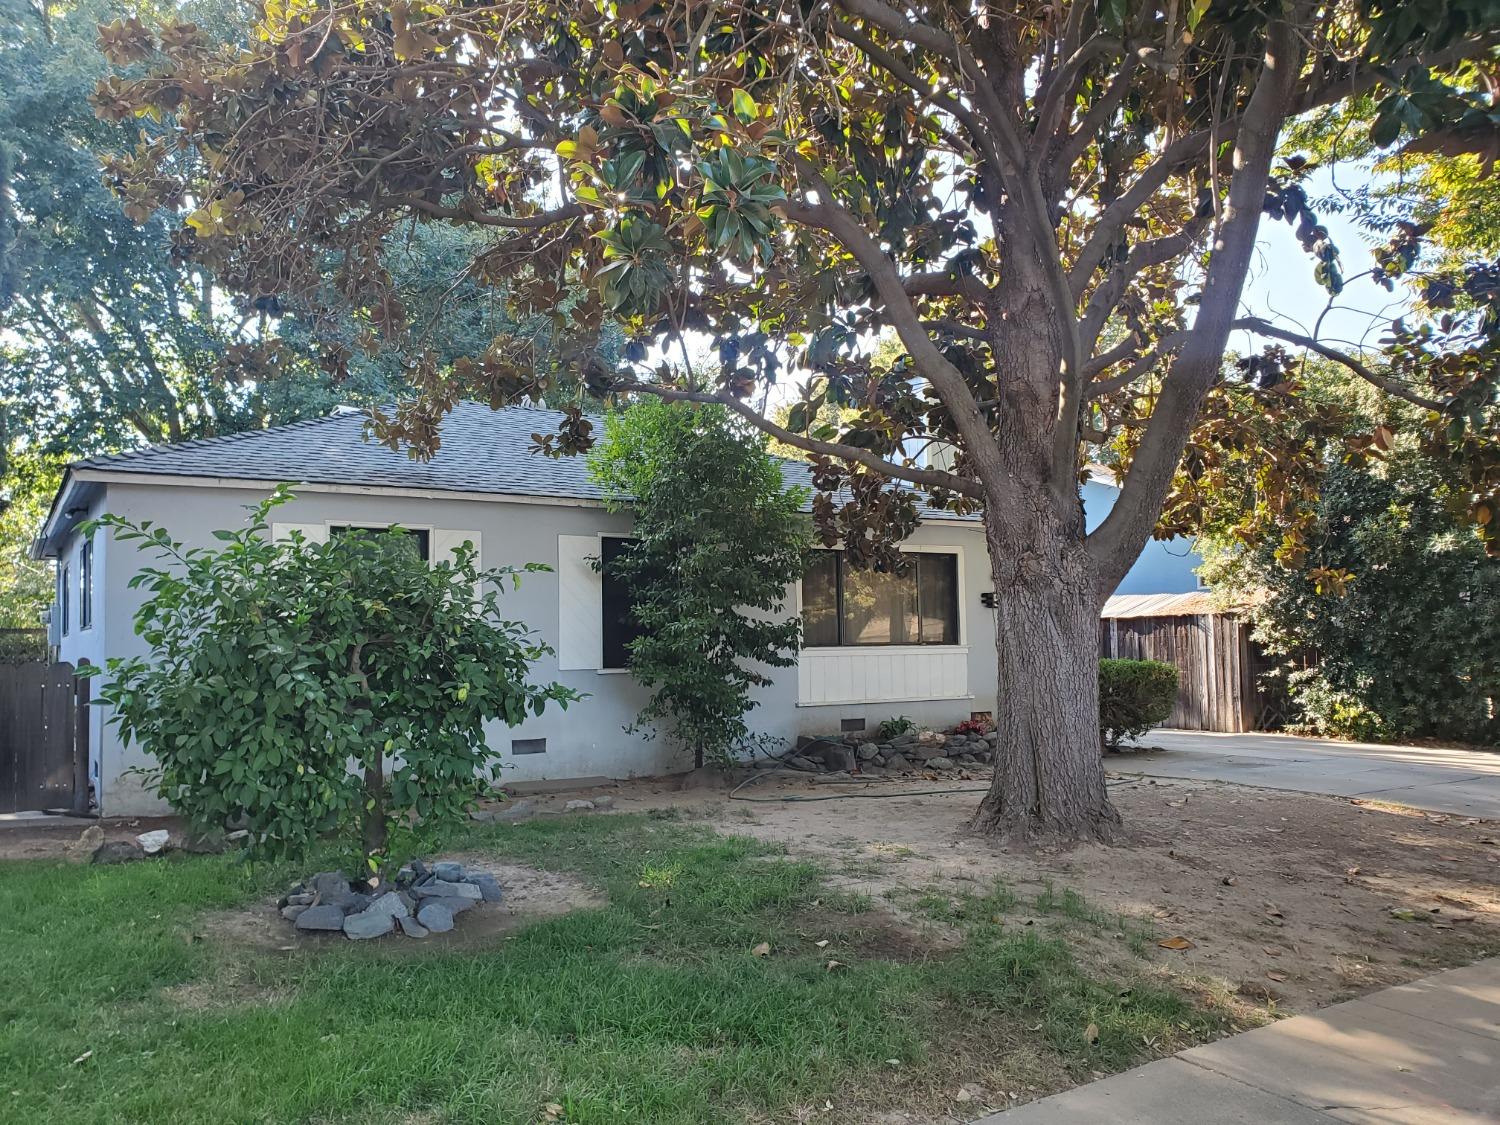 a view of a house with yard and a tree